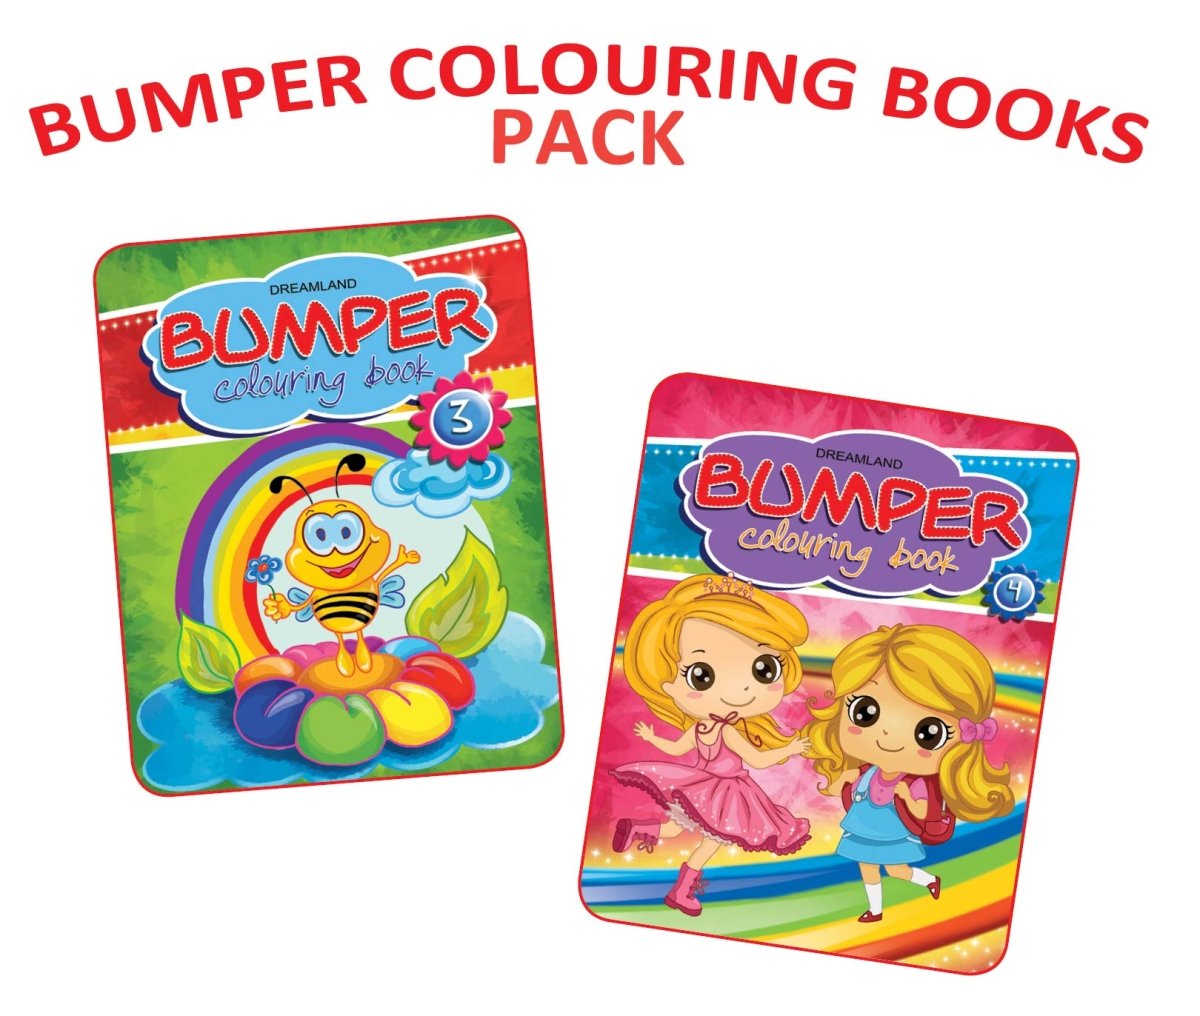 Dreamland Publications Bumper Colouring Books Pack 2 (2 Titles) - 9789350894118